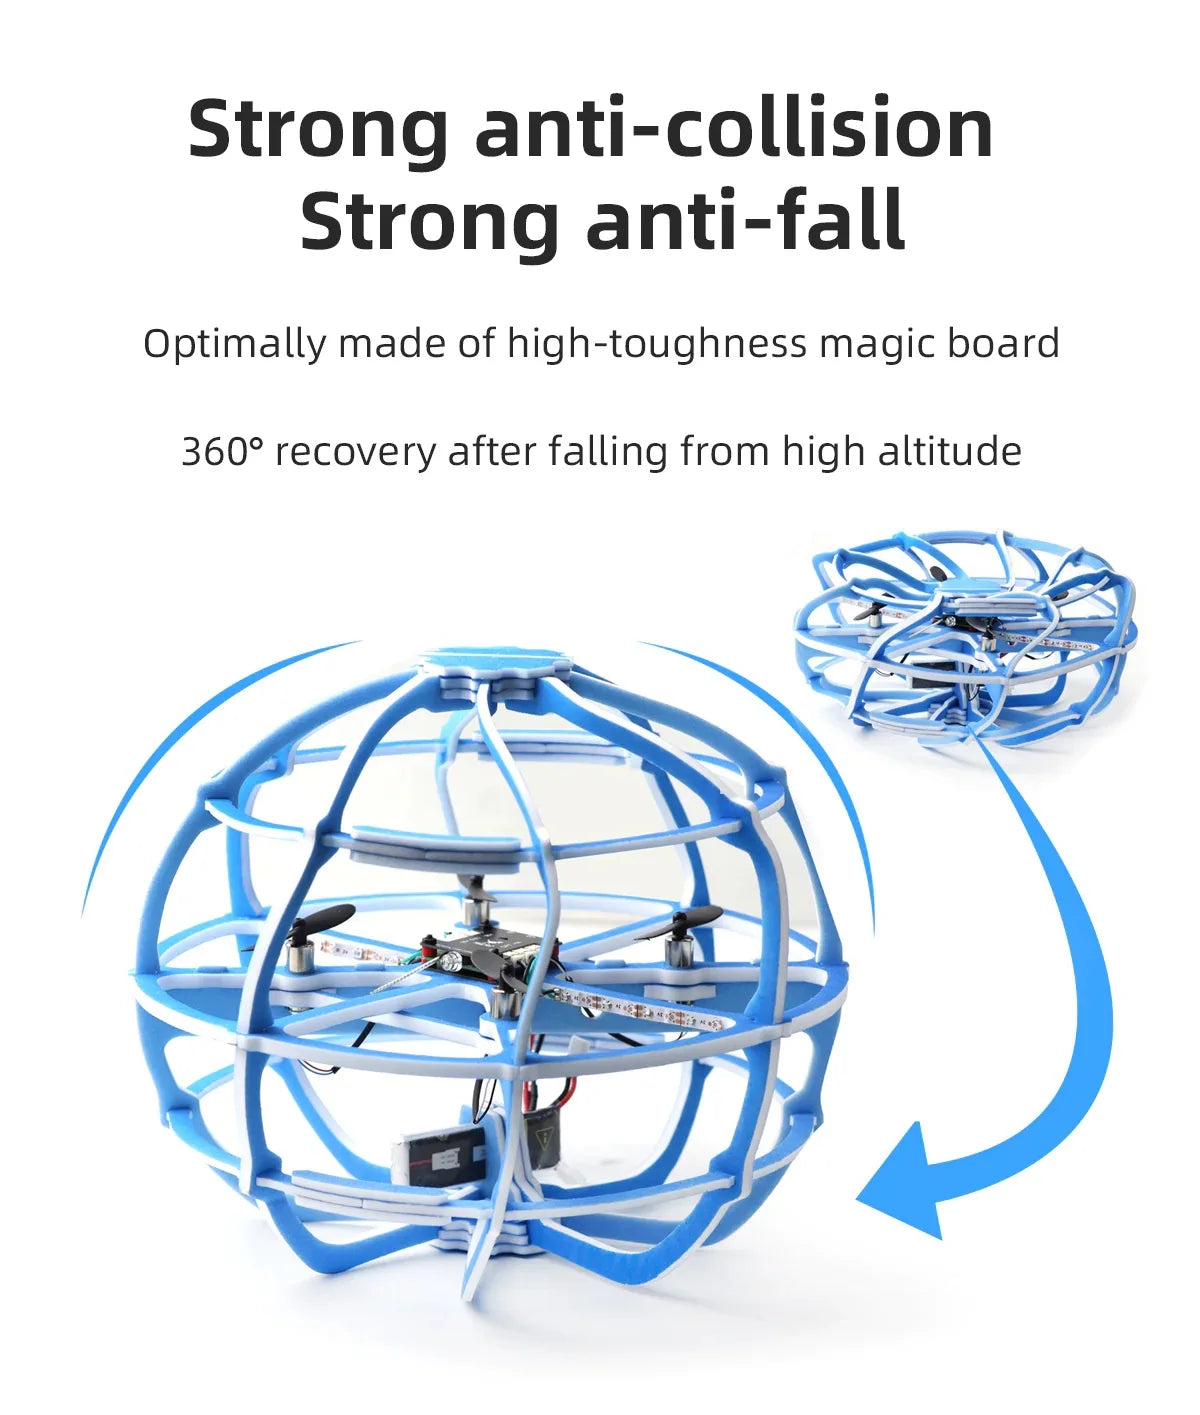 HGLRC A200 Soccer Ball Drone, Optimally made of high-toughness magic board 3609 recovery after falling from